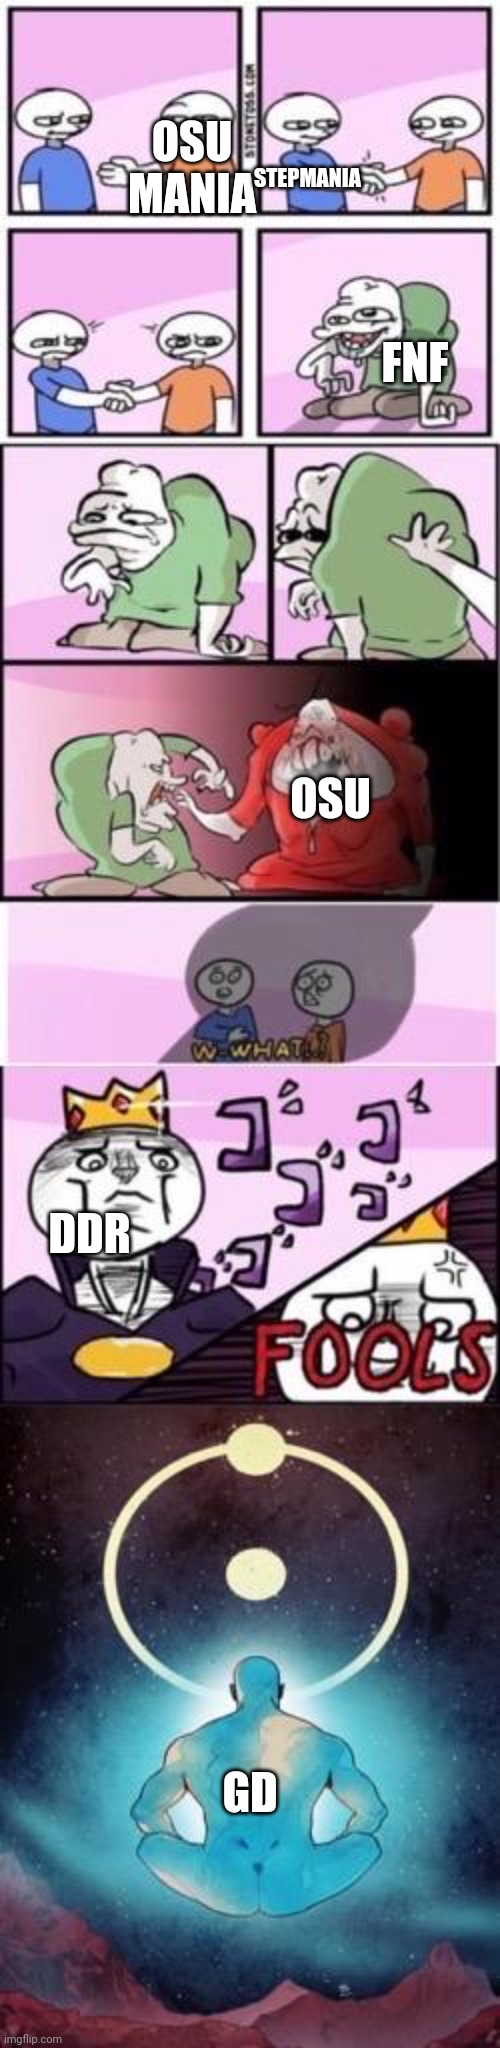 Acquired Tastes | OSU OSU MANIA FNF STEPMANIA DDR GD | image tagged in acquired tastes | made w/ Imgflip meme maker